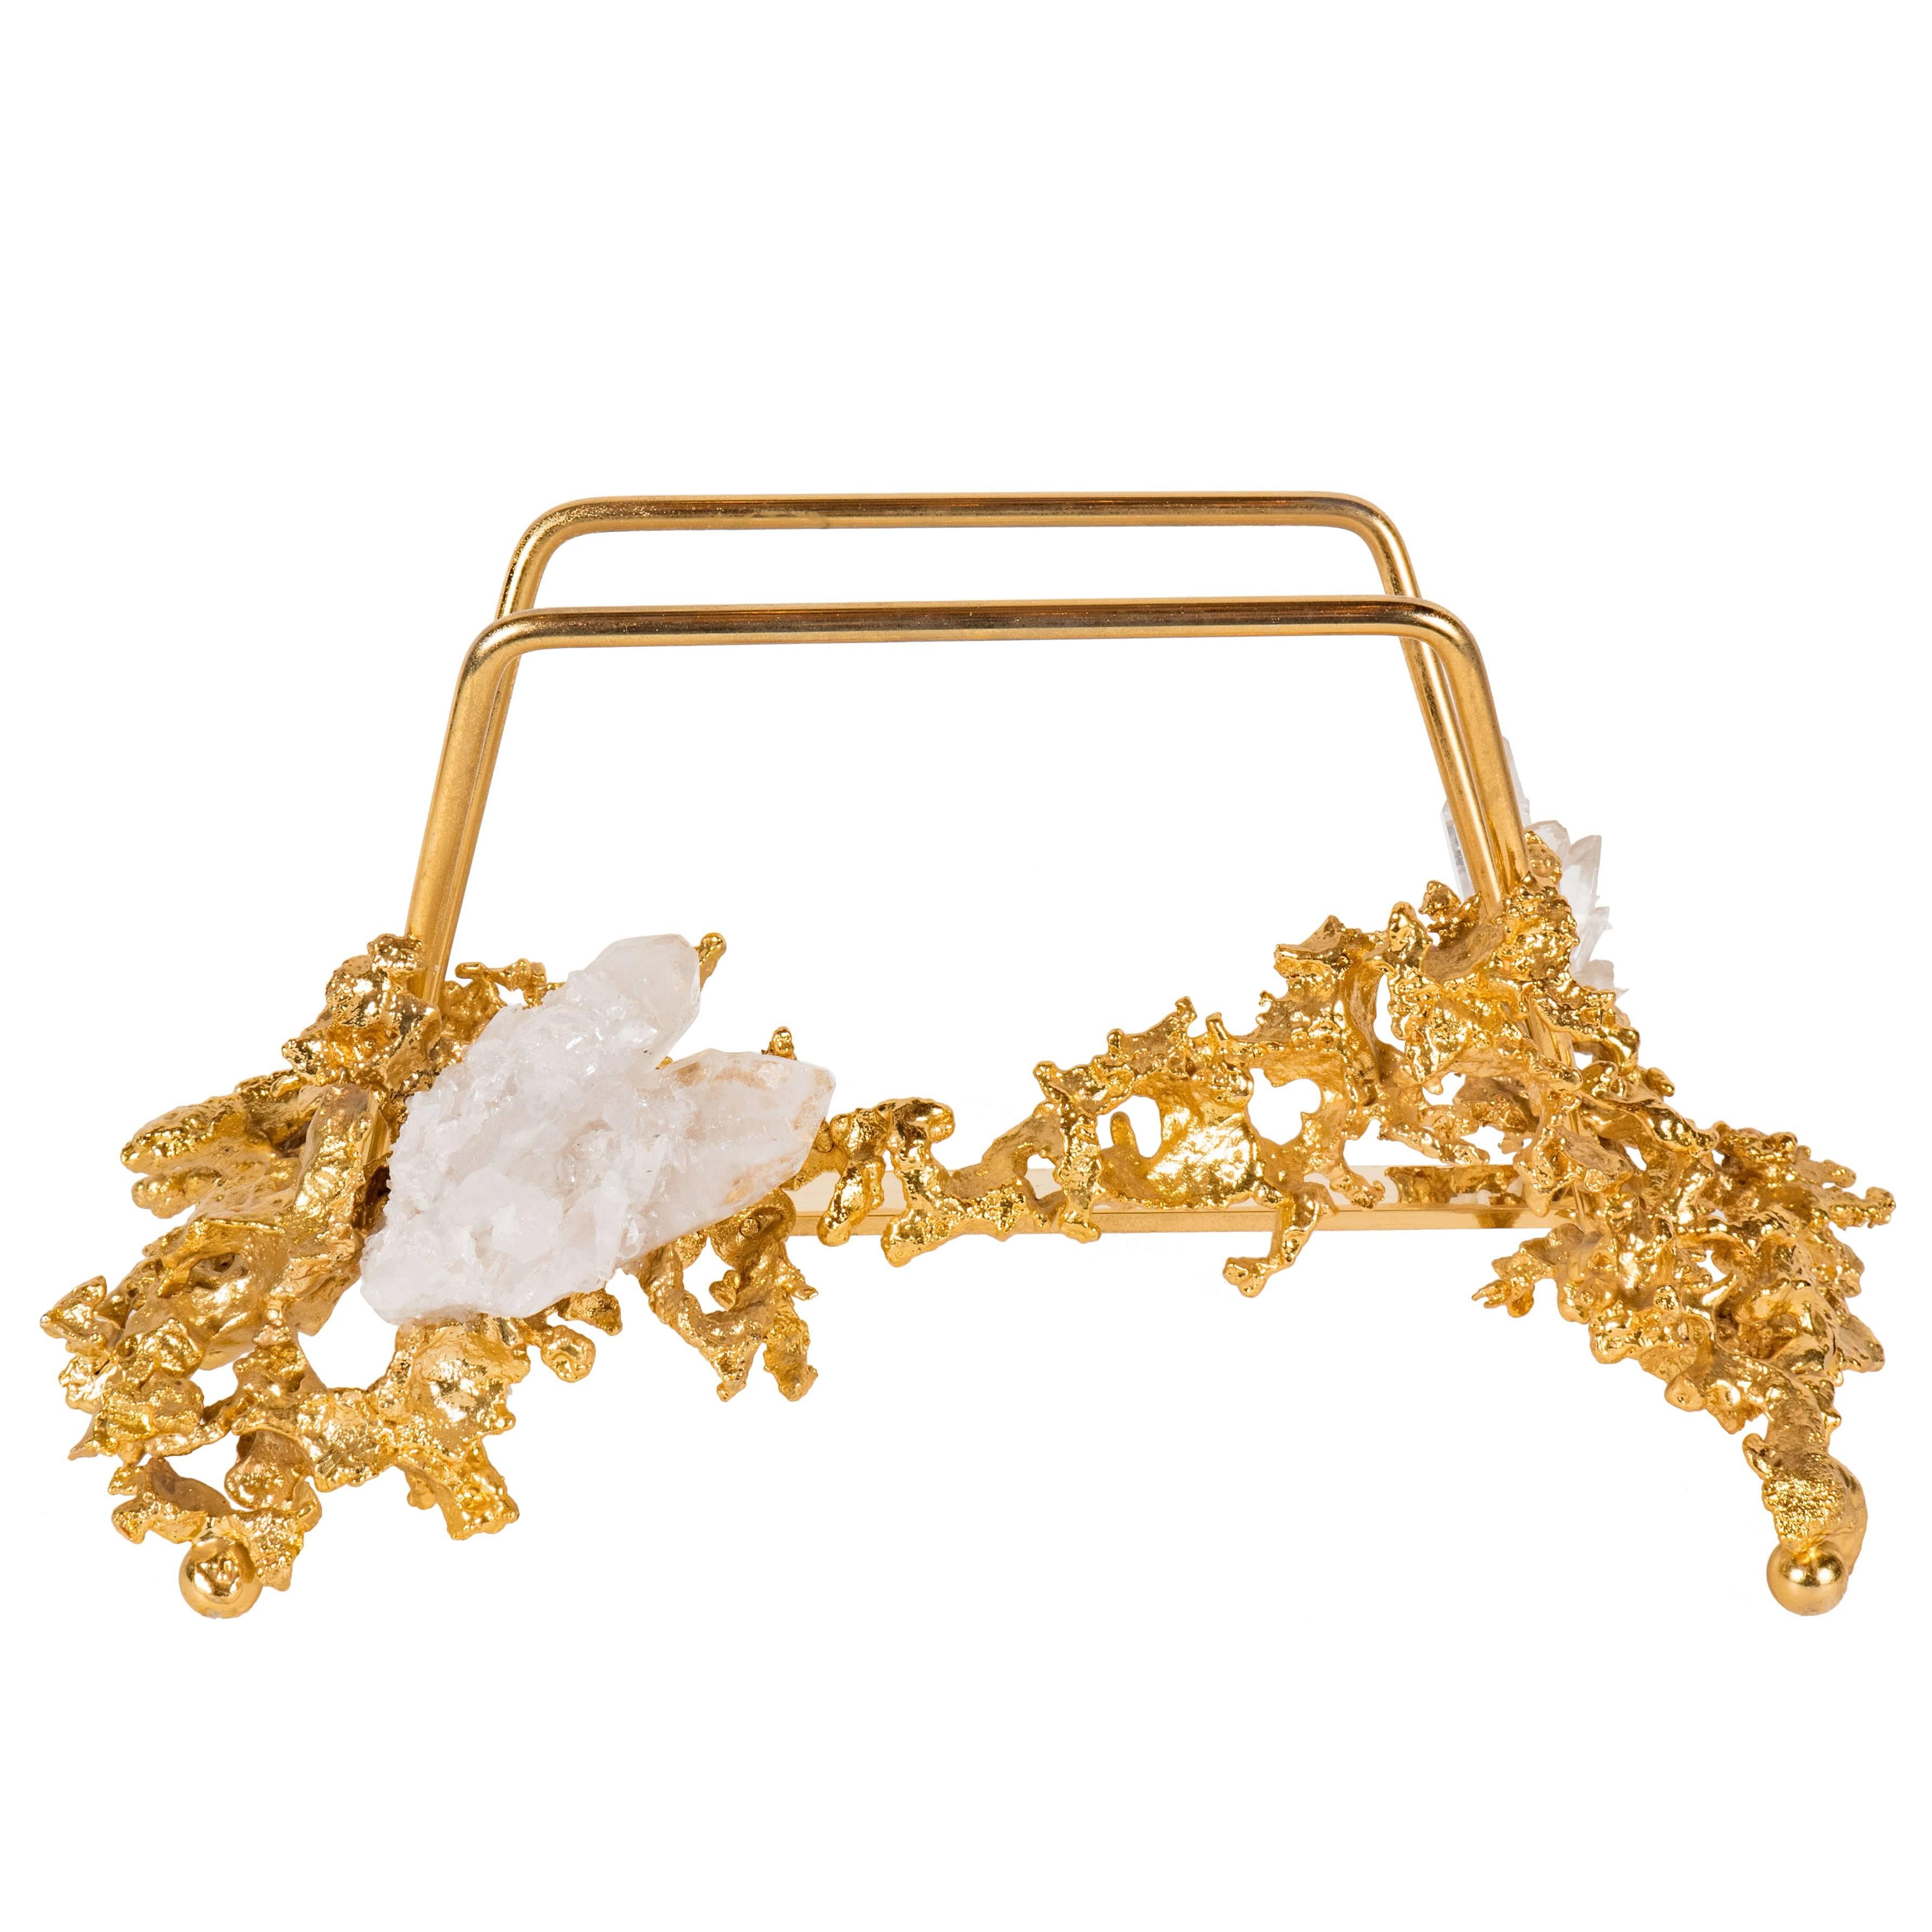 Luxe Letter Holder by Claude Boeltz in Gilded Bronze and Rock Crystal